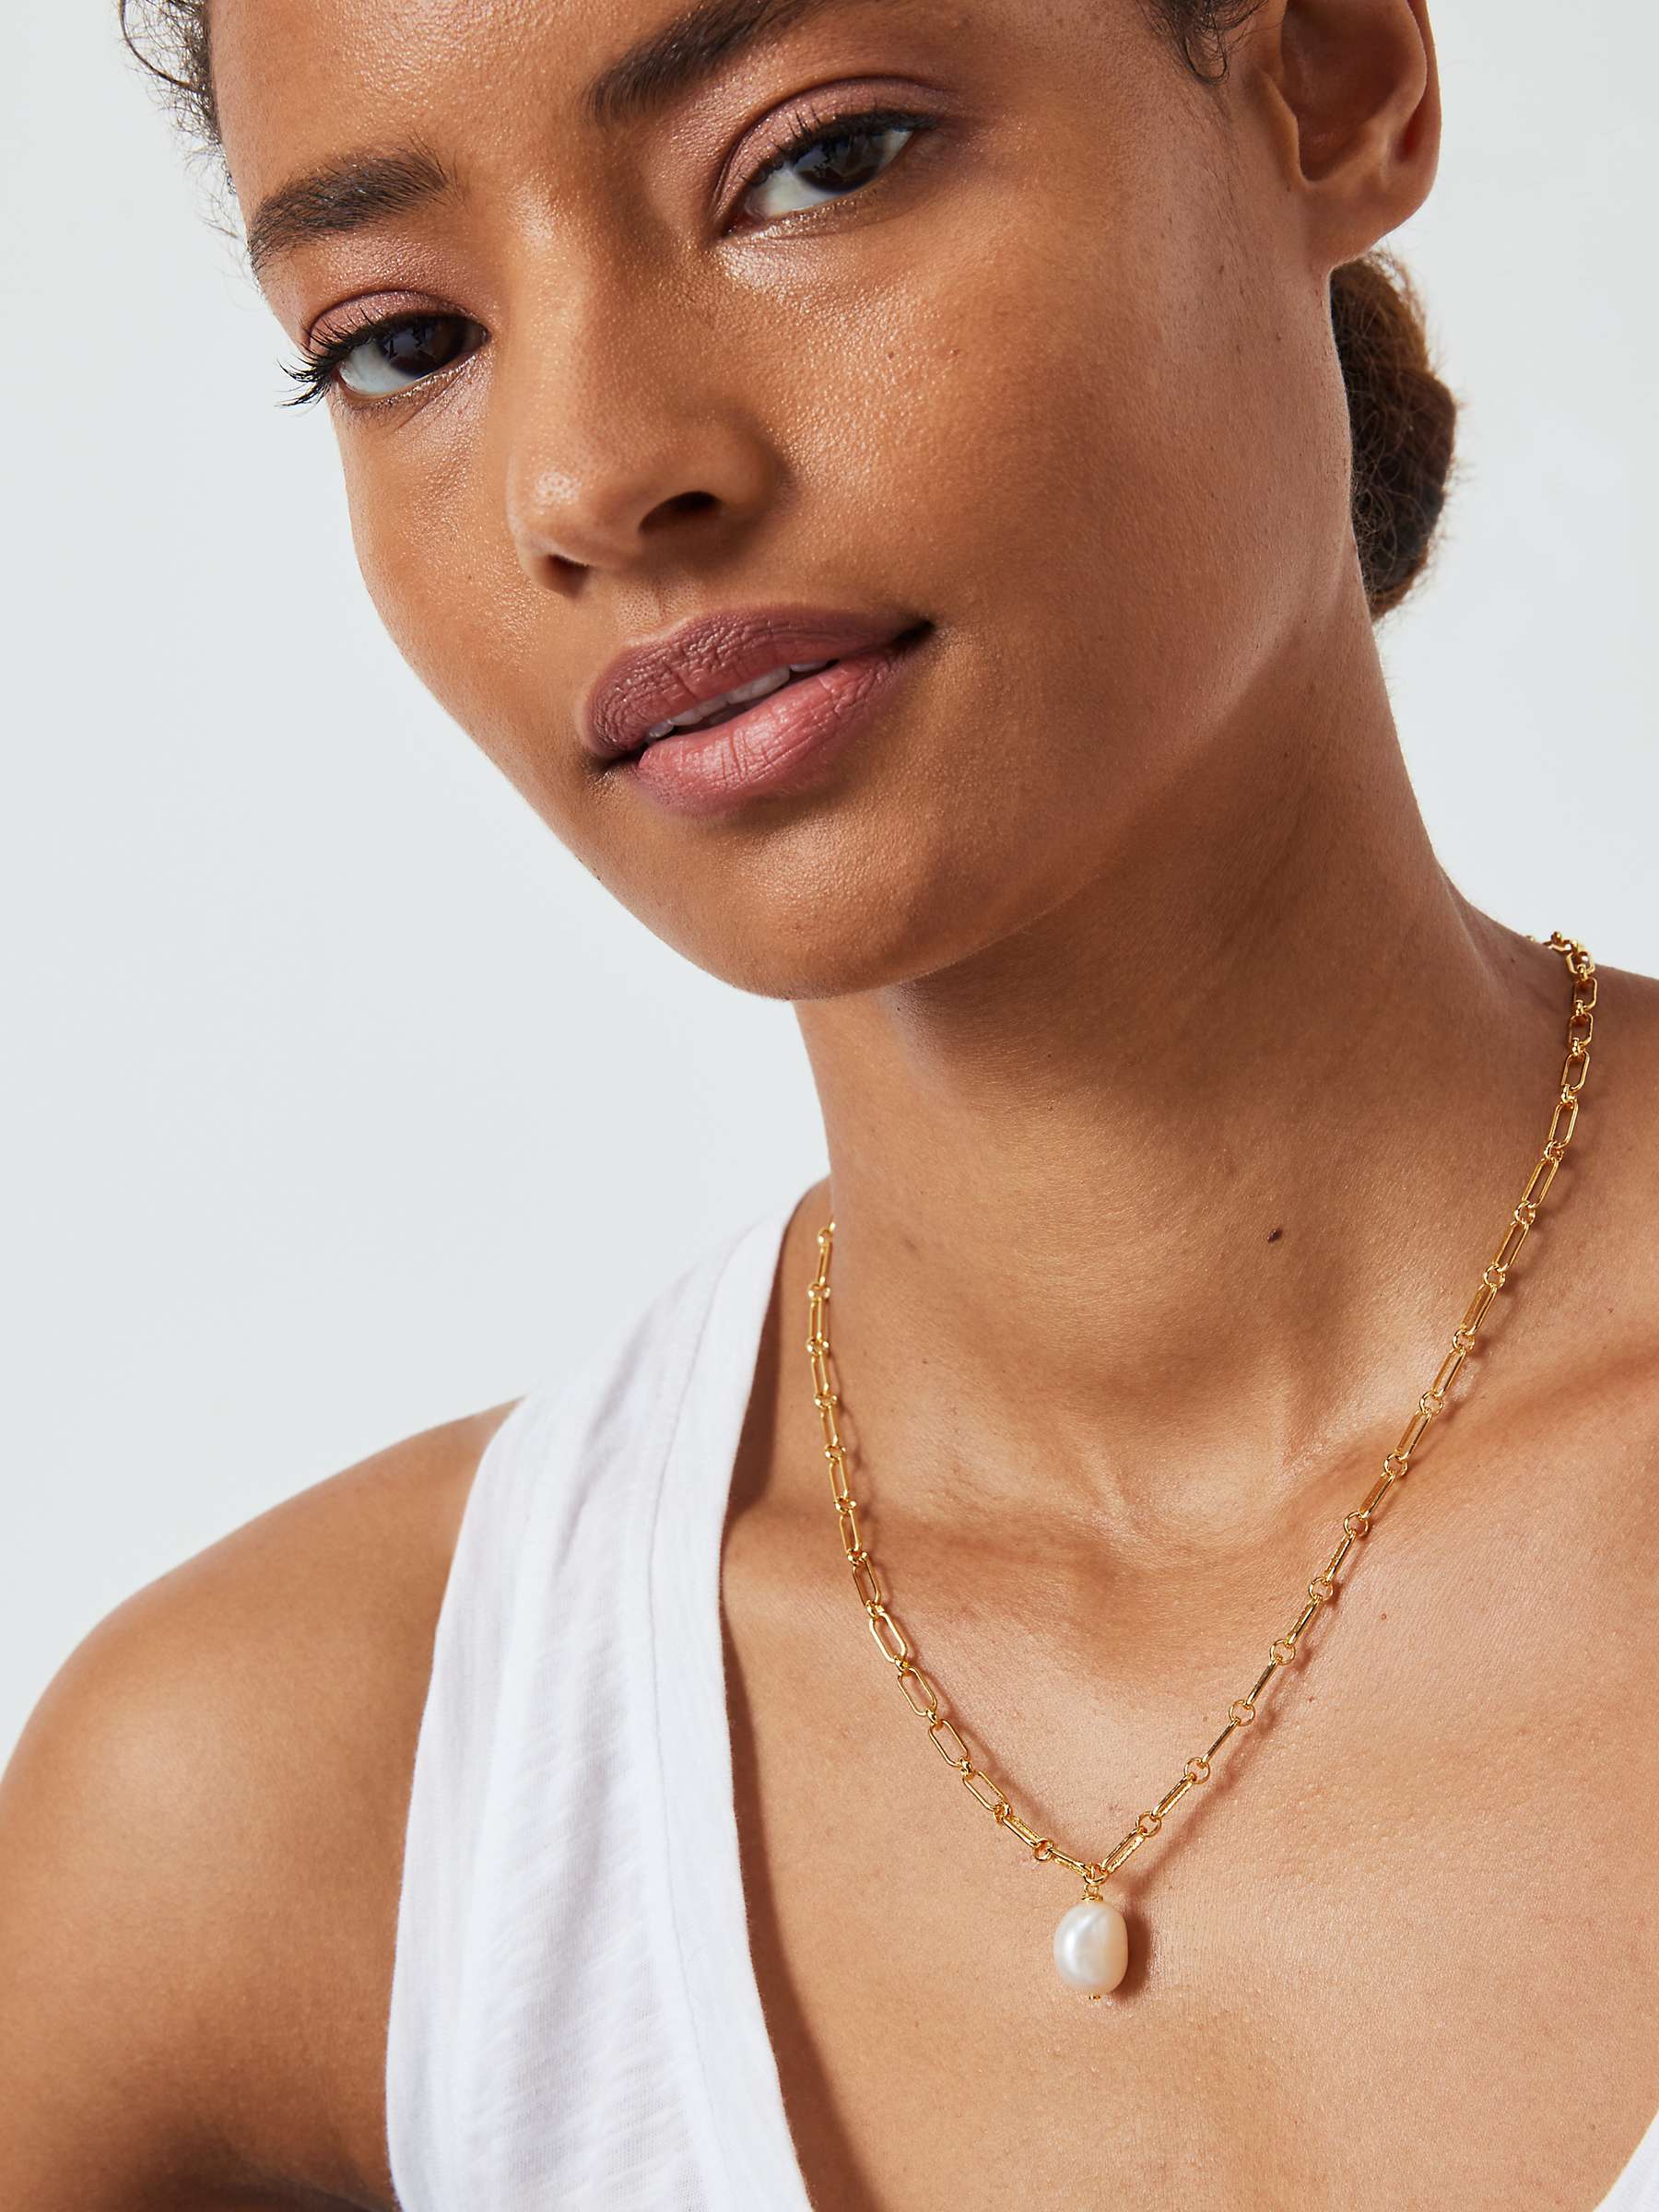 Buy John Lewis Gemstones & Pearls Baroque Pearl Paperclip Pendant Necklace, Gold Online at johnlewis.com